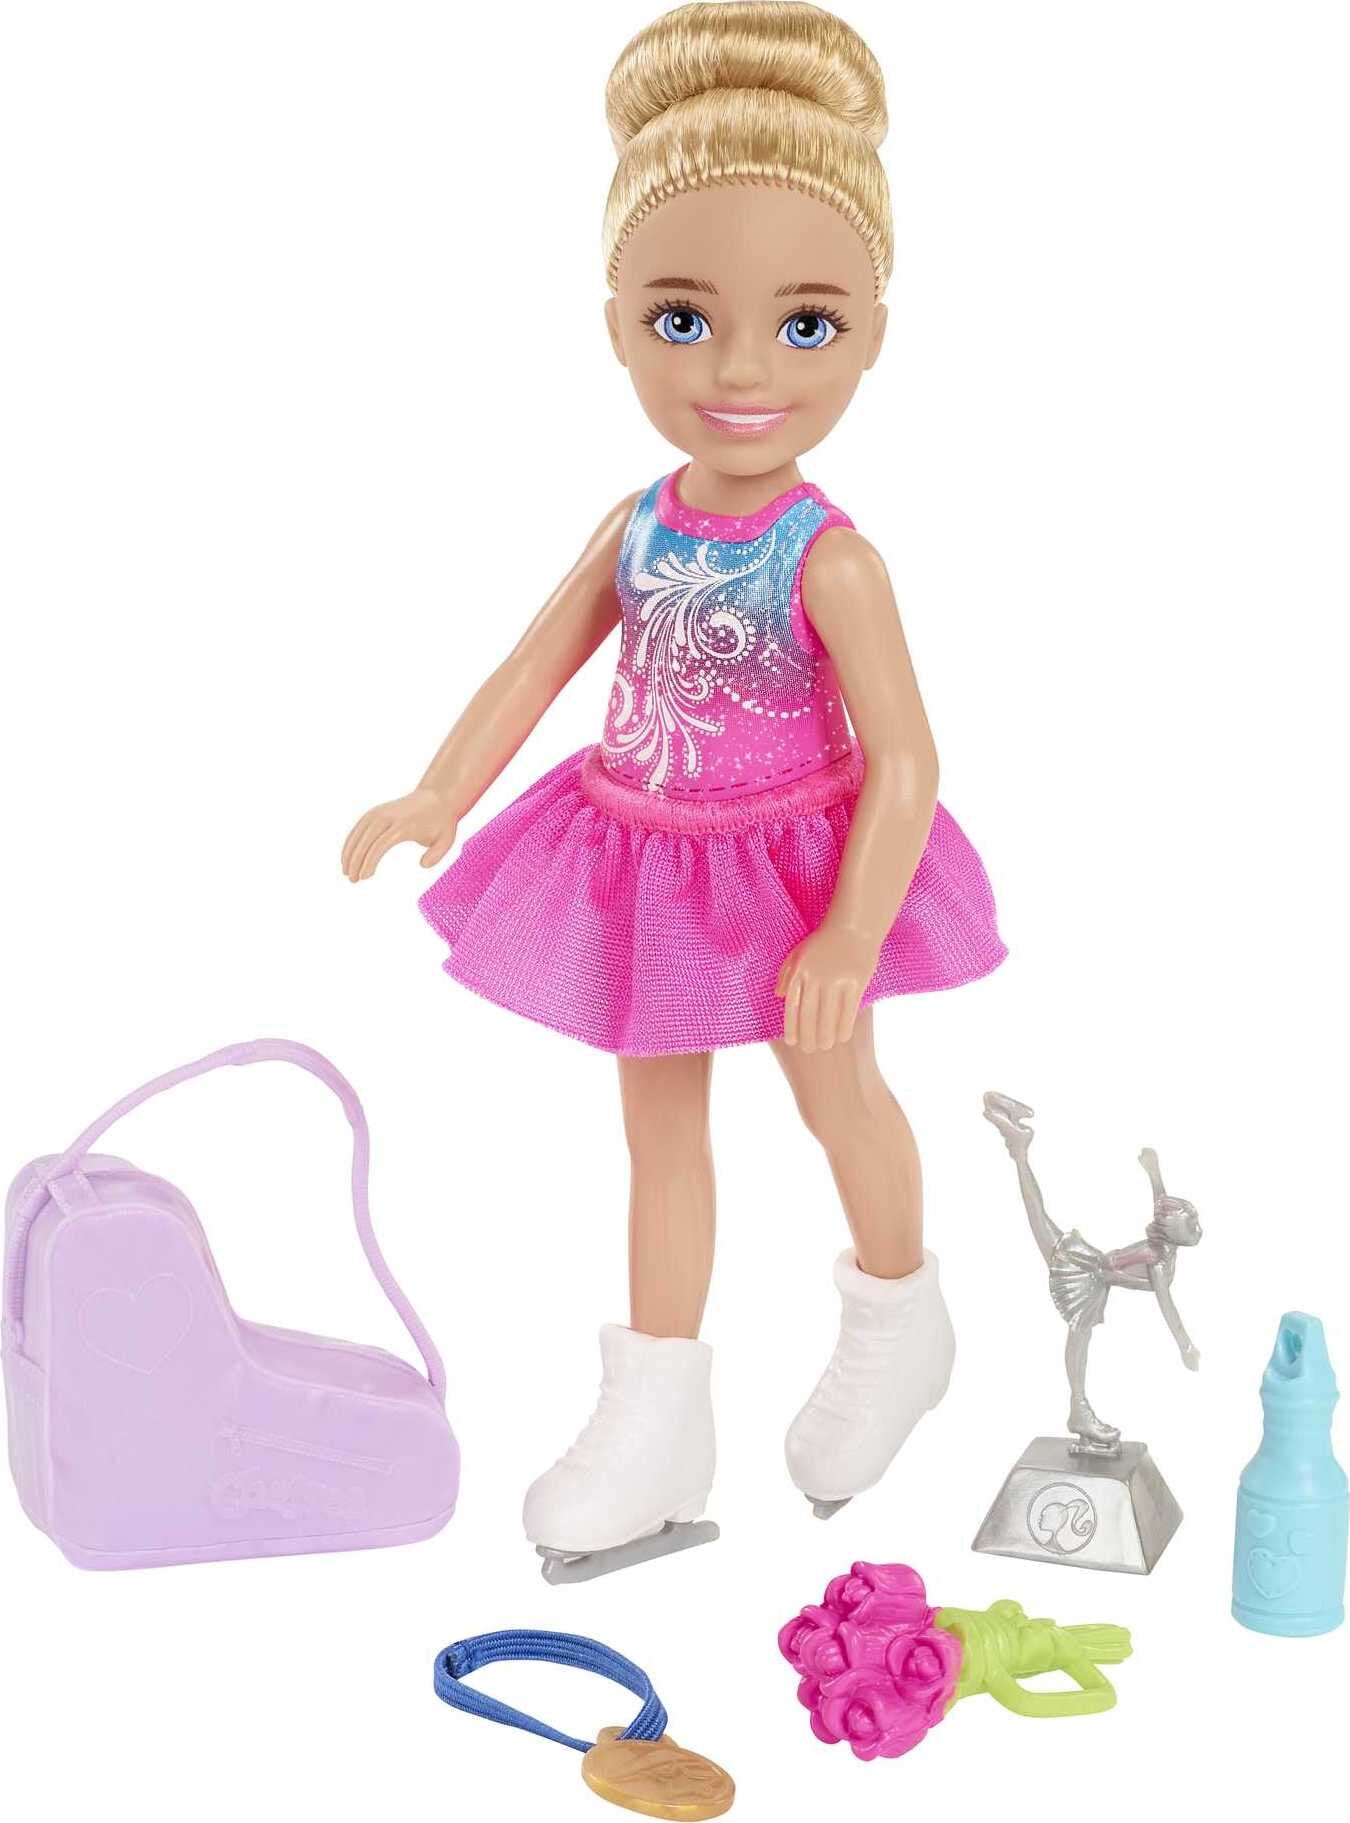 Barbie Chelsea Can Be Toy Store Playset with Small Blonde Doll, Shop  Furniture & 15 Accessories 